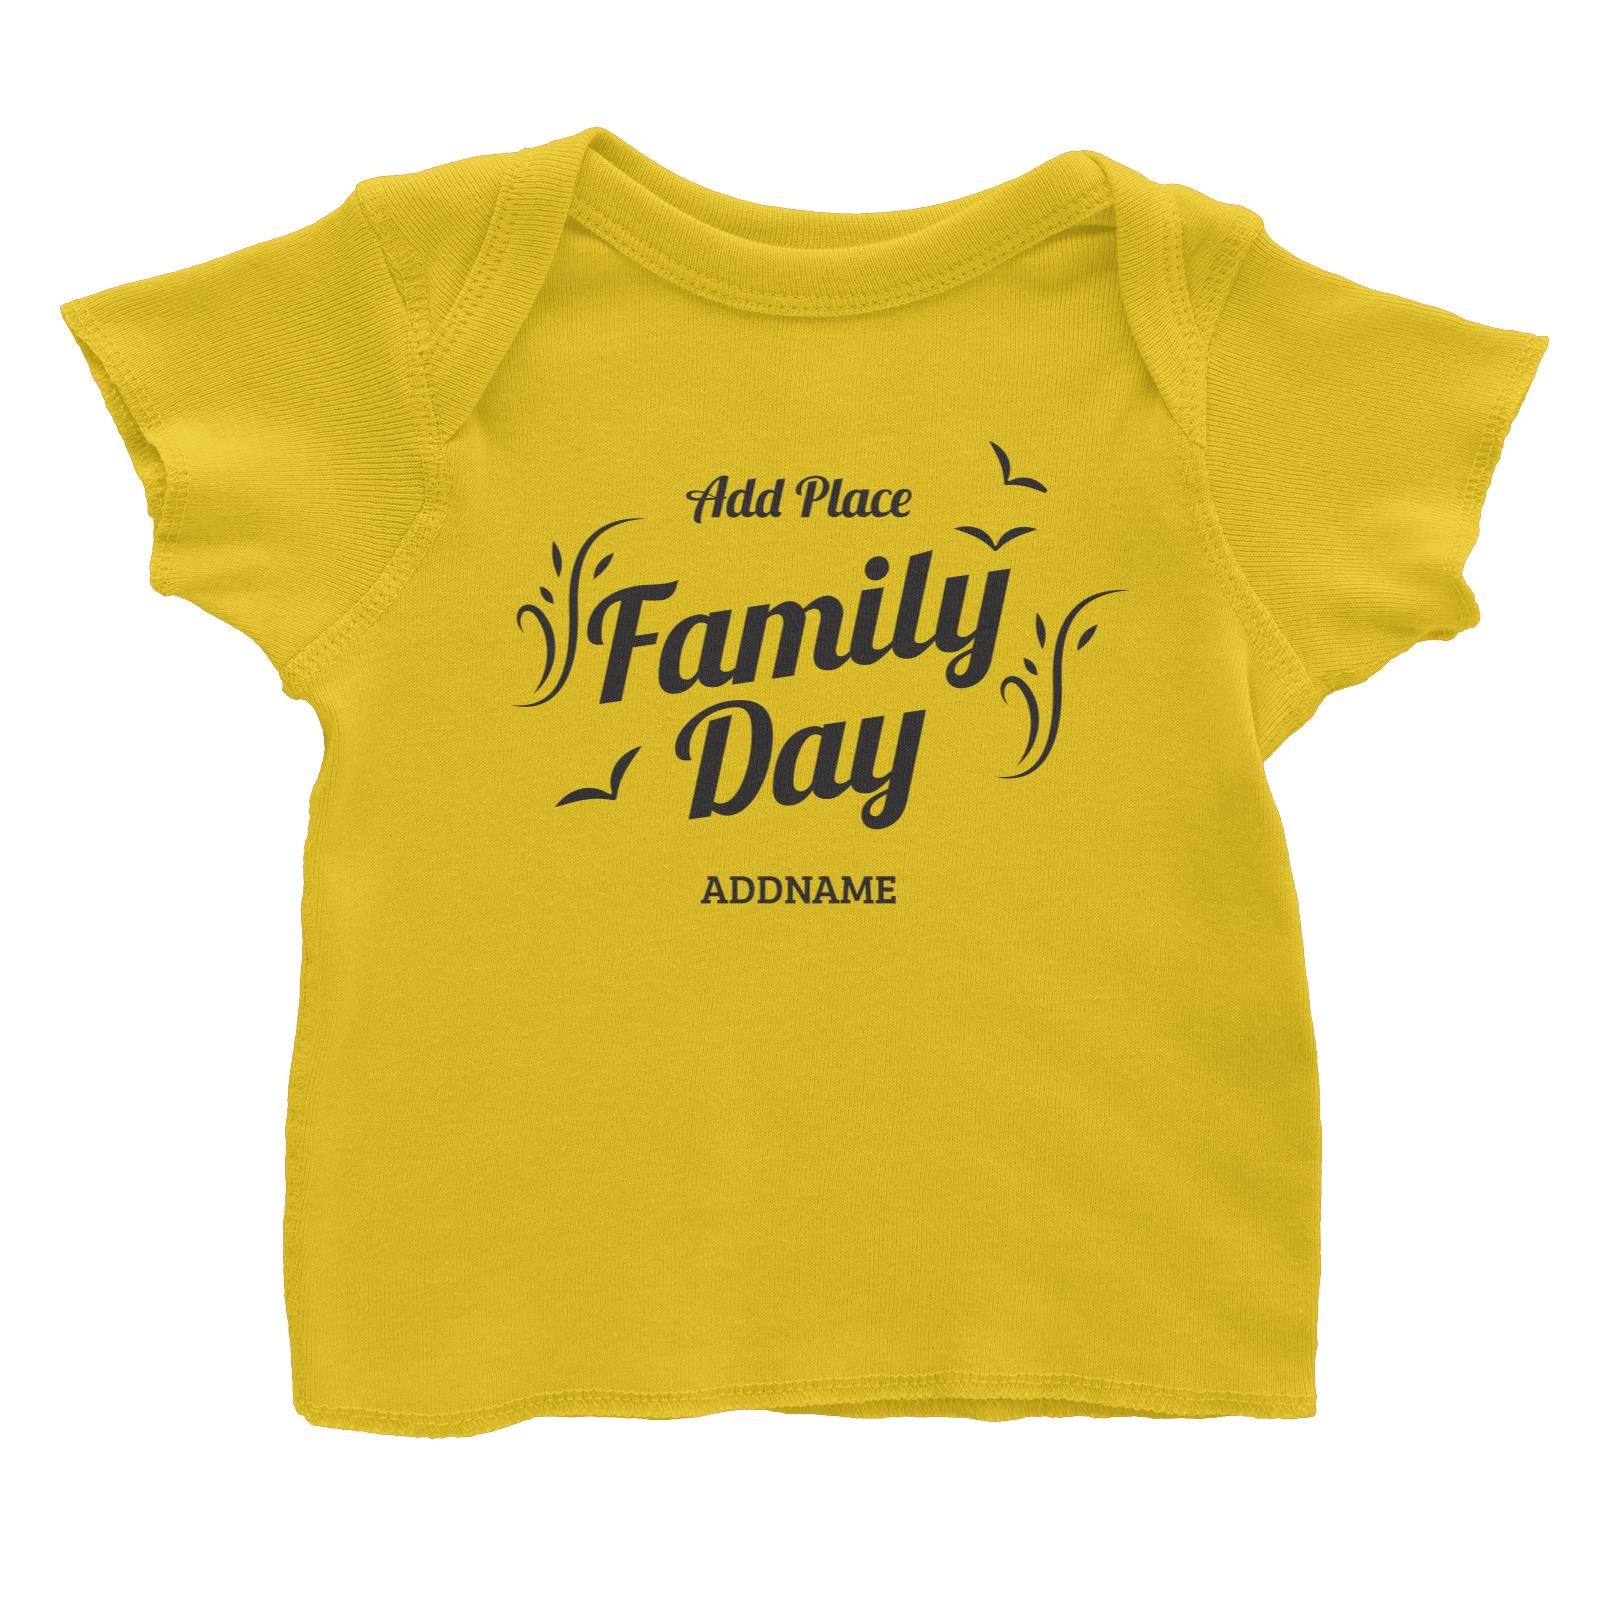 Family Day Flight Birds Icon Family Day Addname And Add Place Baby T-Shirt